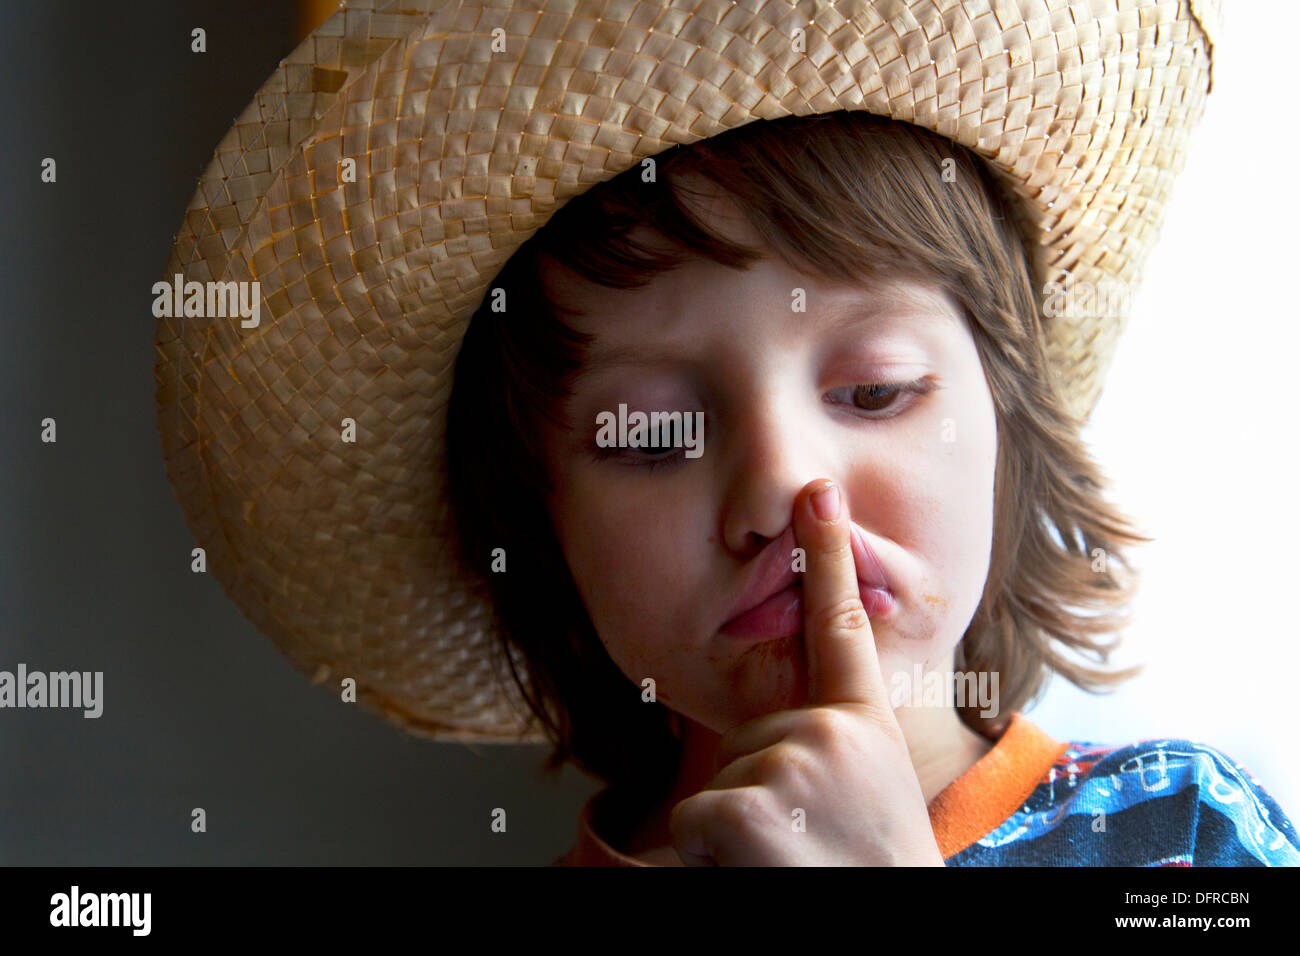 Four and a half year old boy wearing a wicker hat holding his index finger to his mouth. Stock Photo